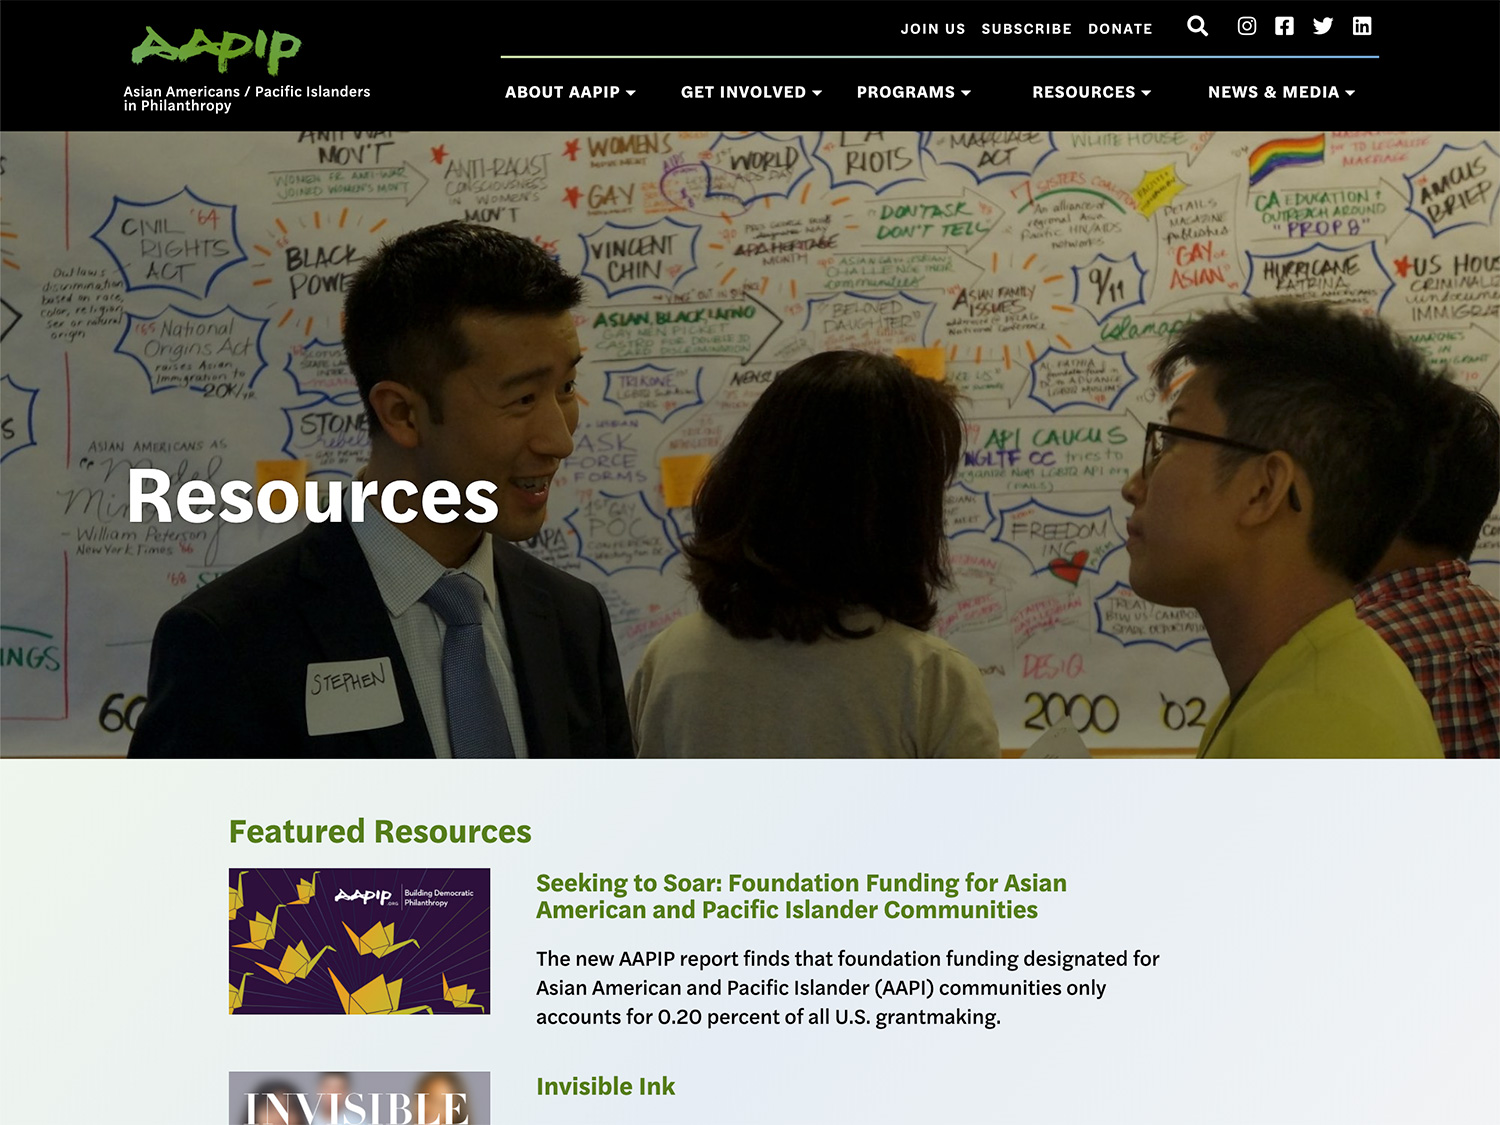 aapip.org resources page